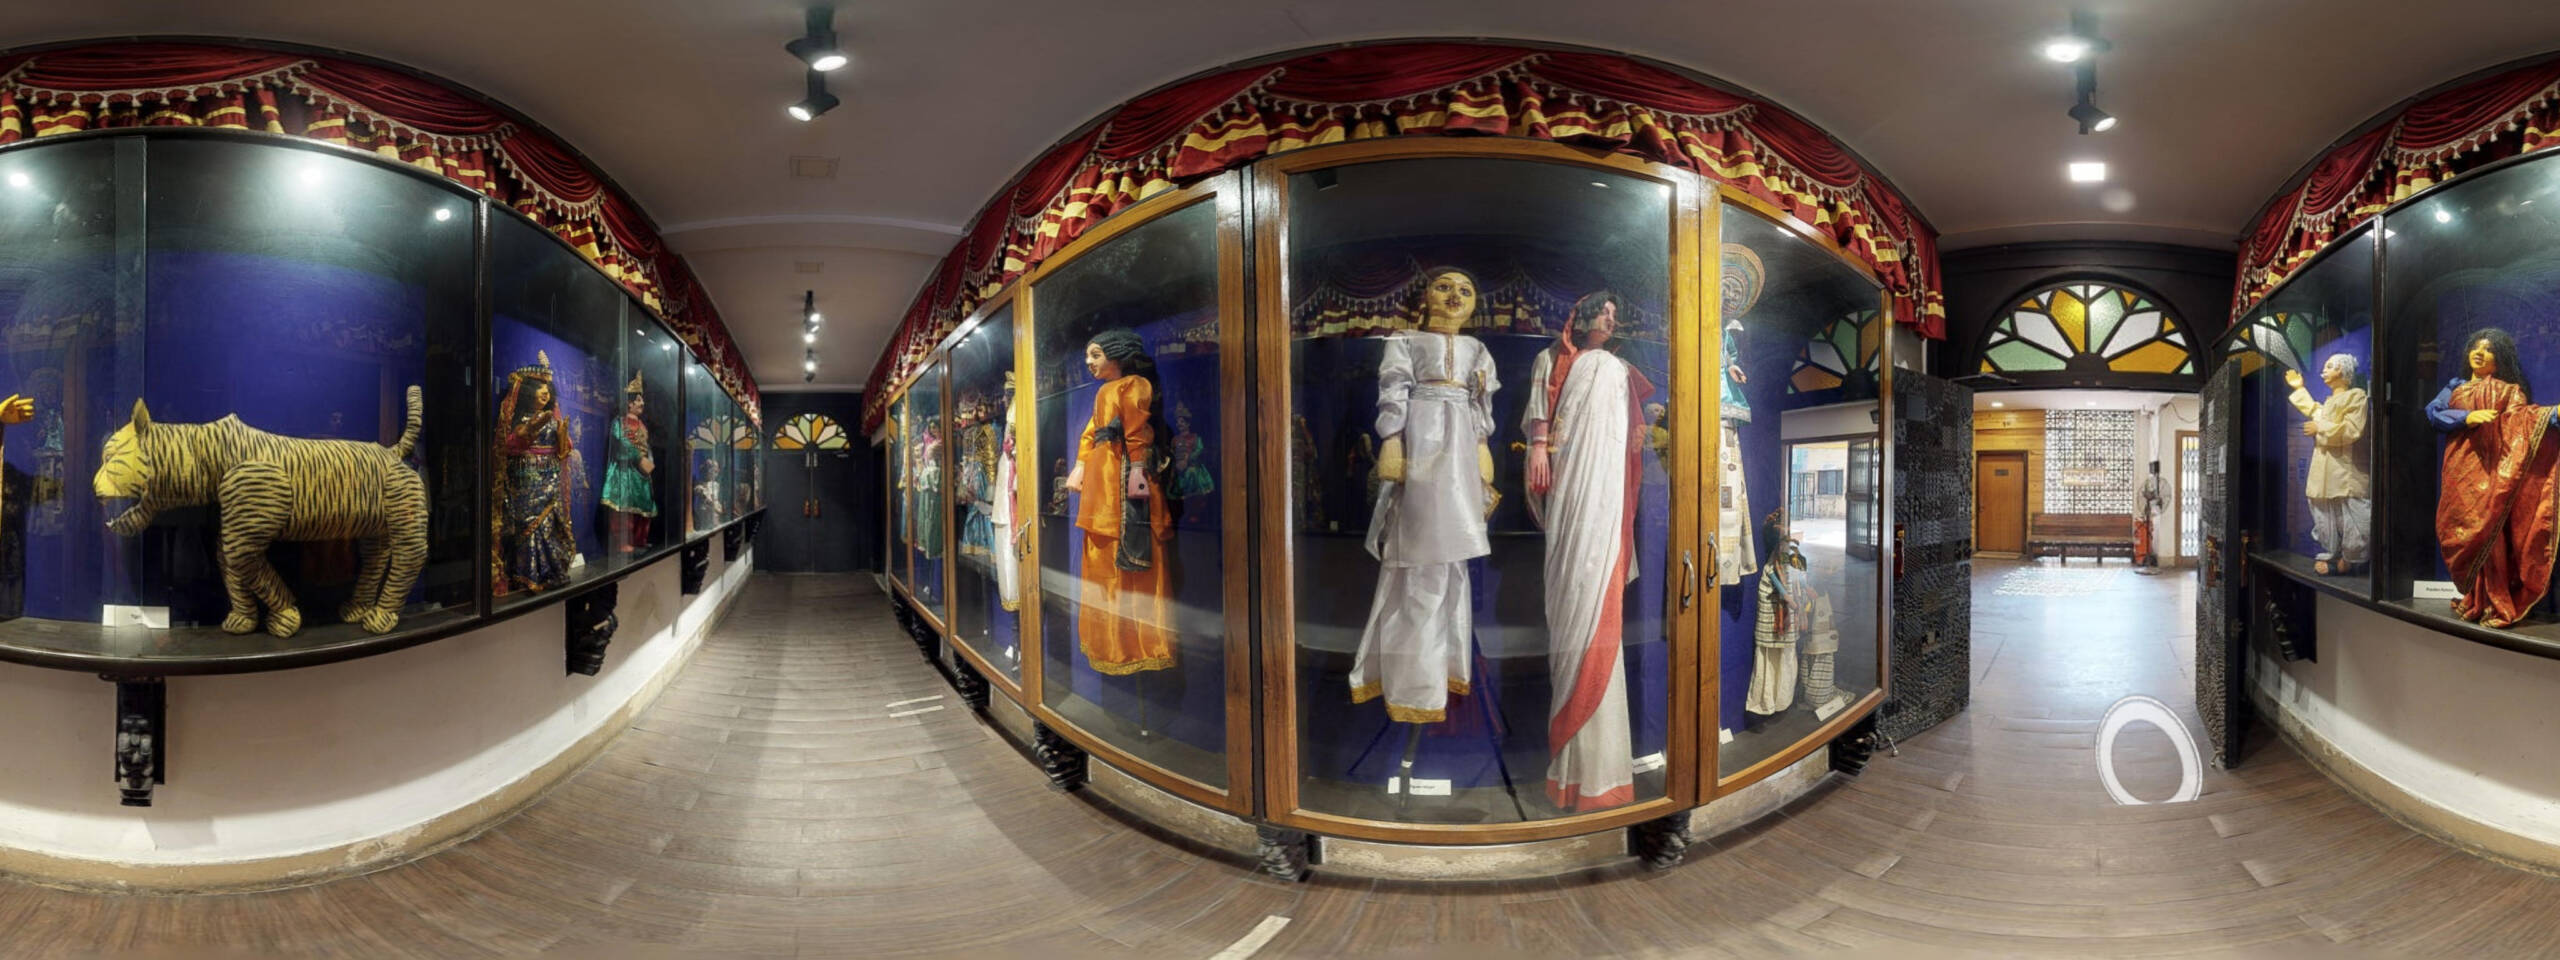 360 degree view of Puppets of Bengal gallery of CRI Museum